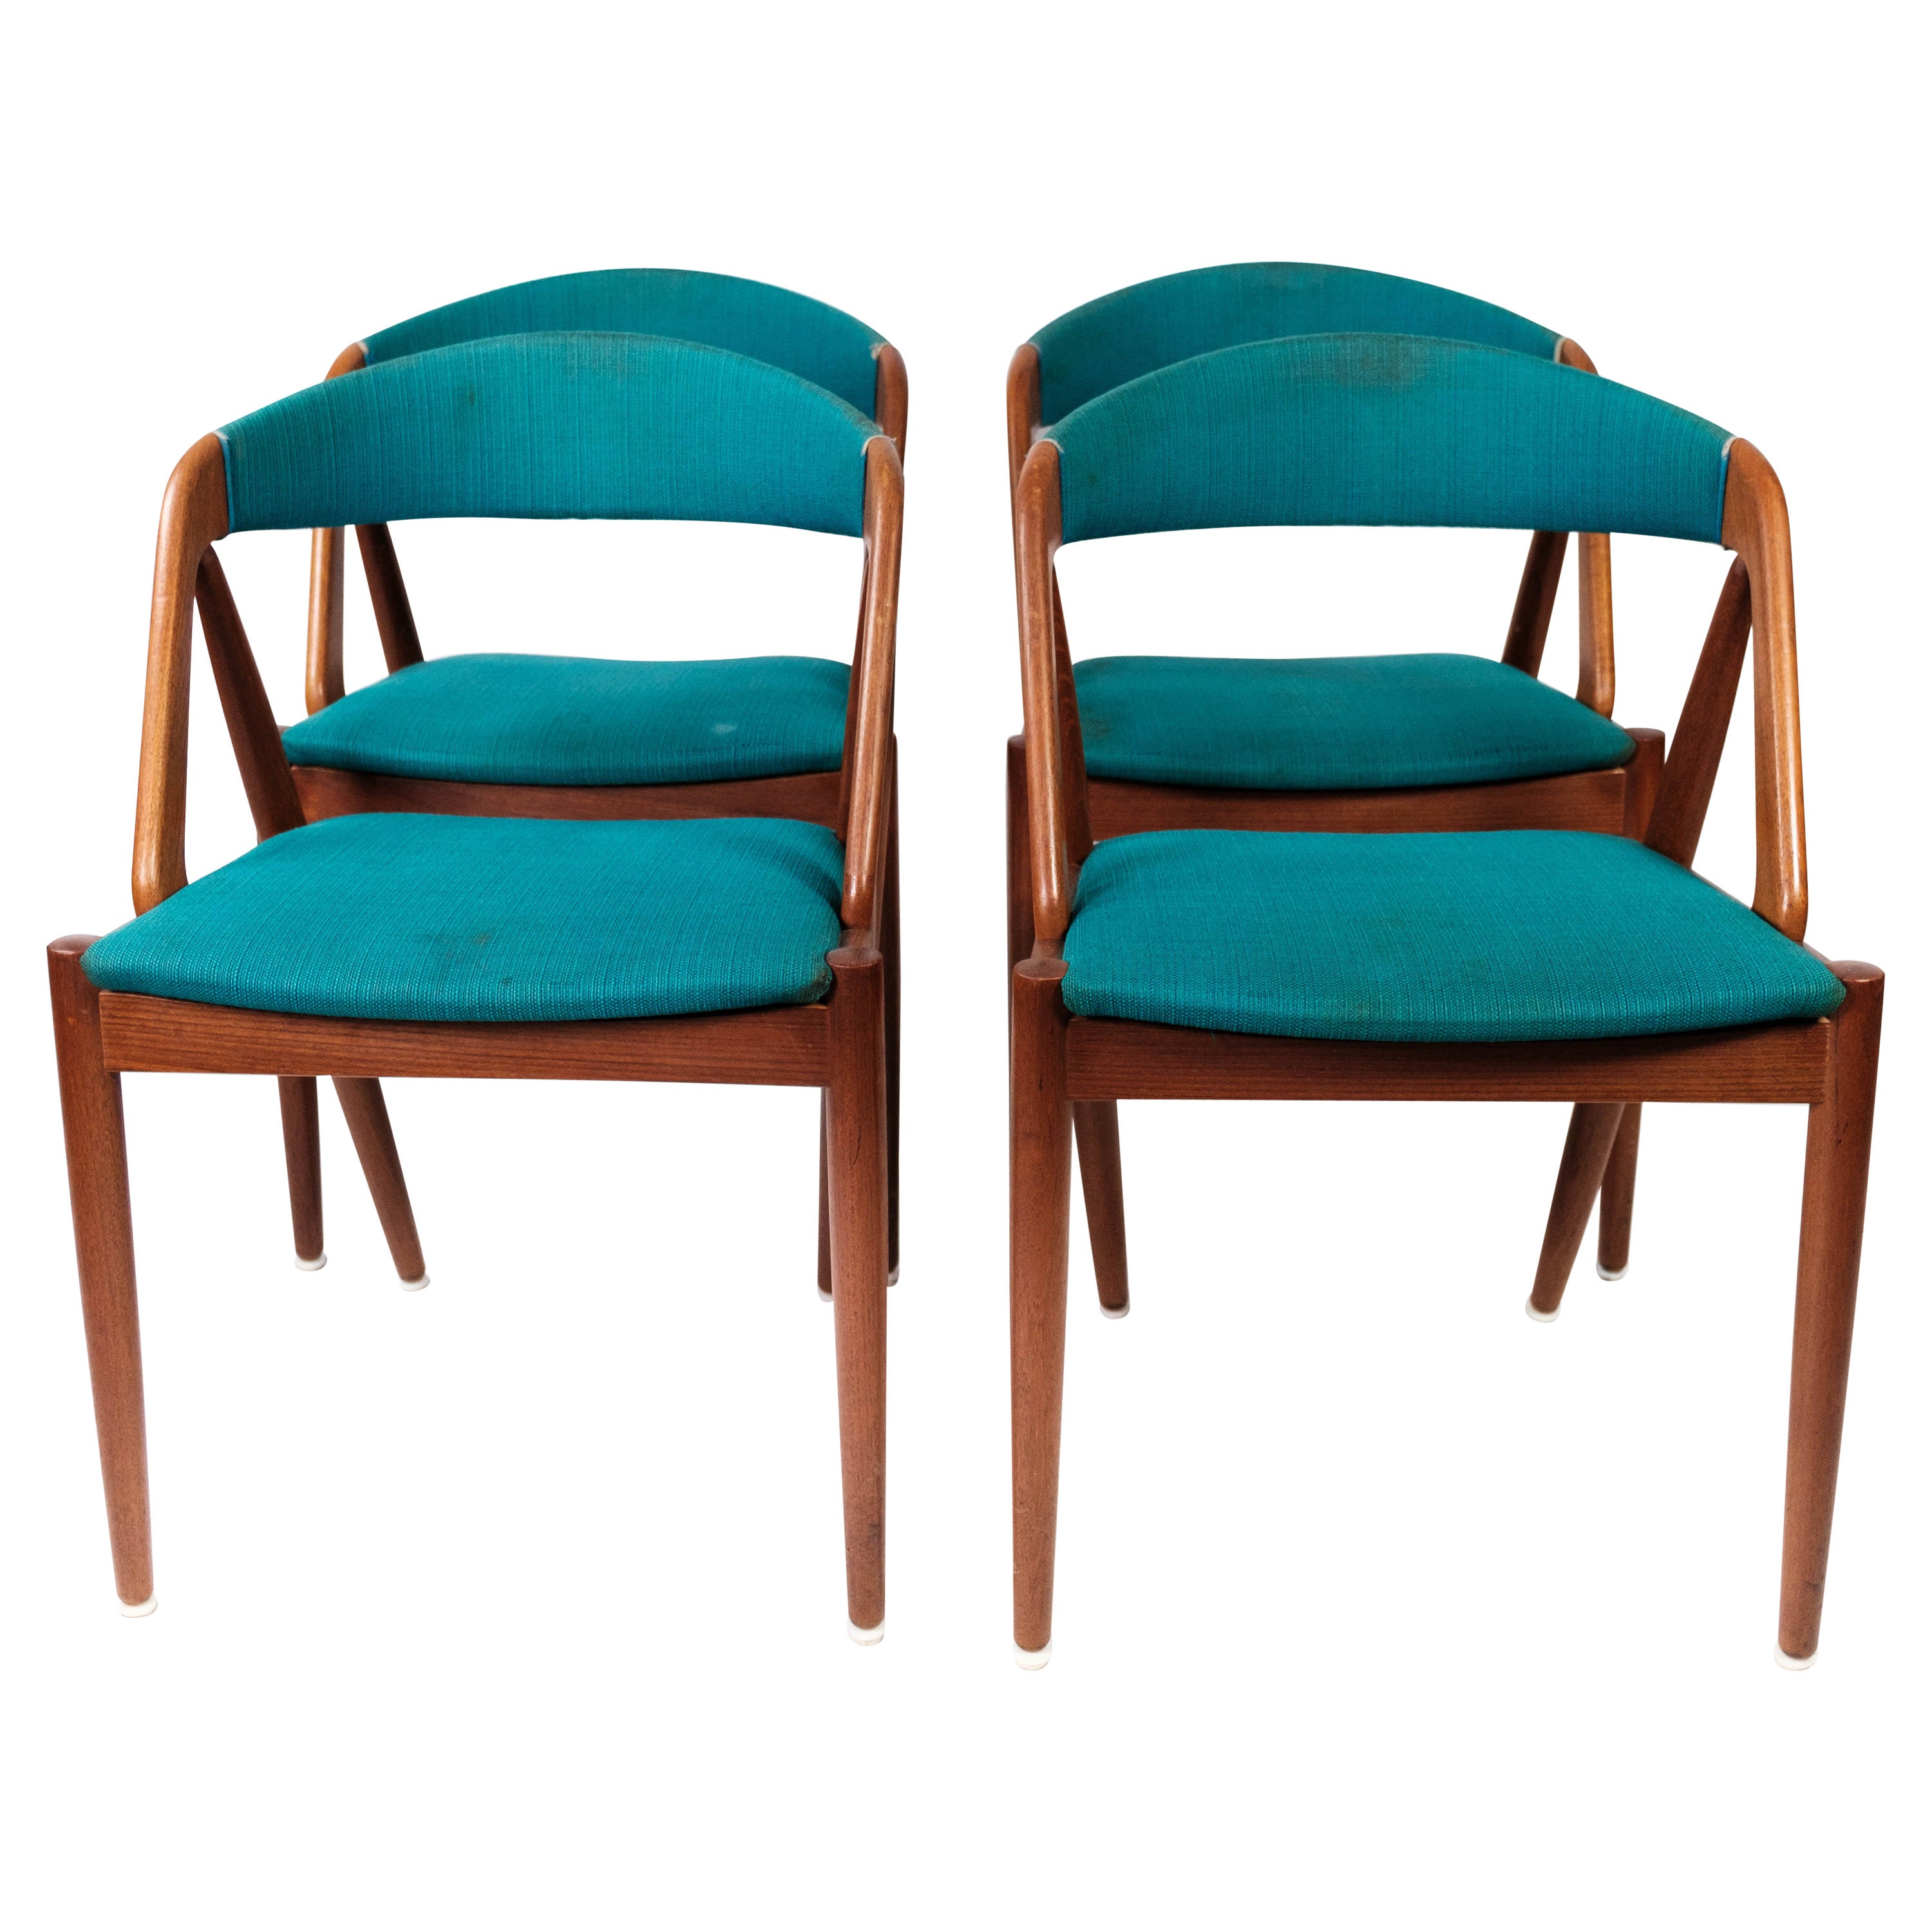 Set of Four Dining Room Chairs, Model 31, Designed by Kai Kristiansen in 1956